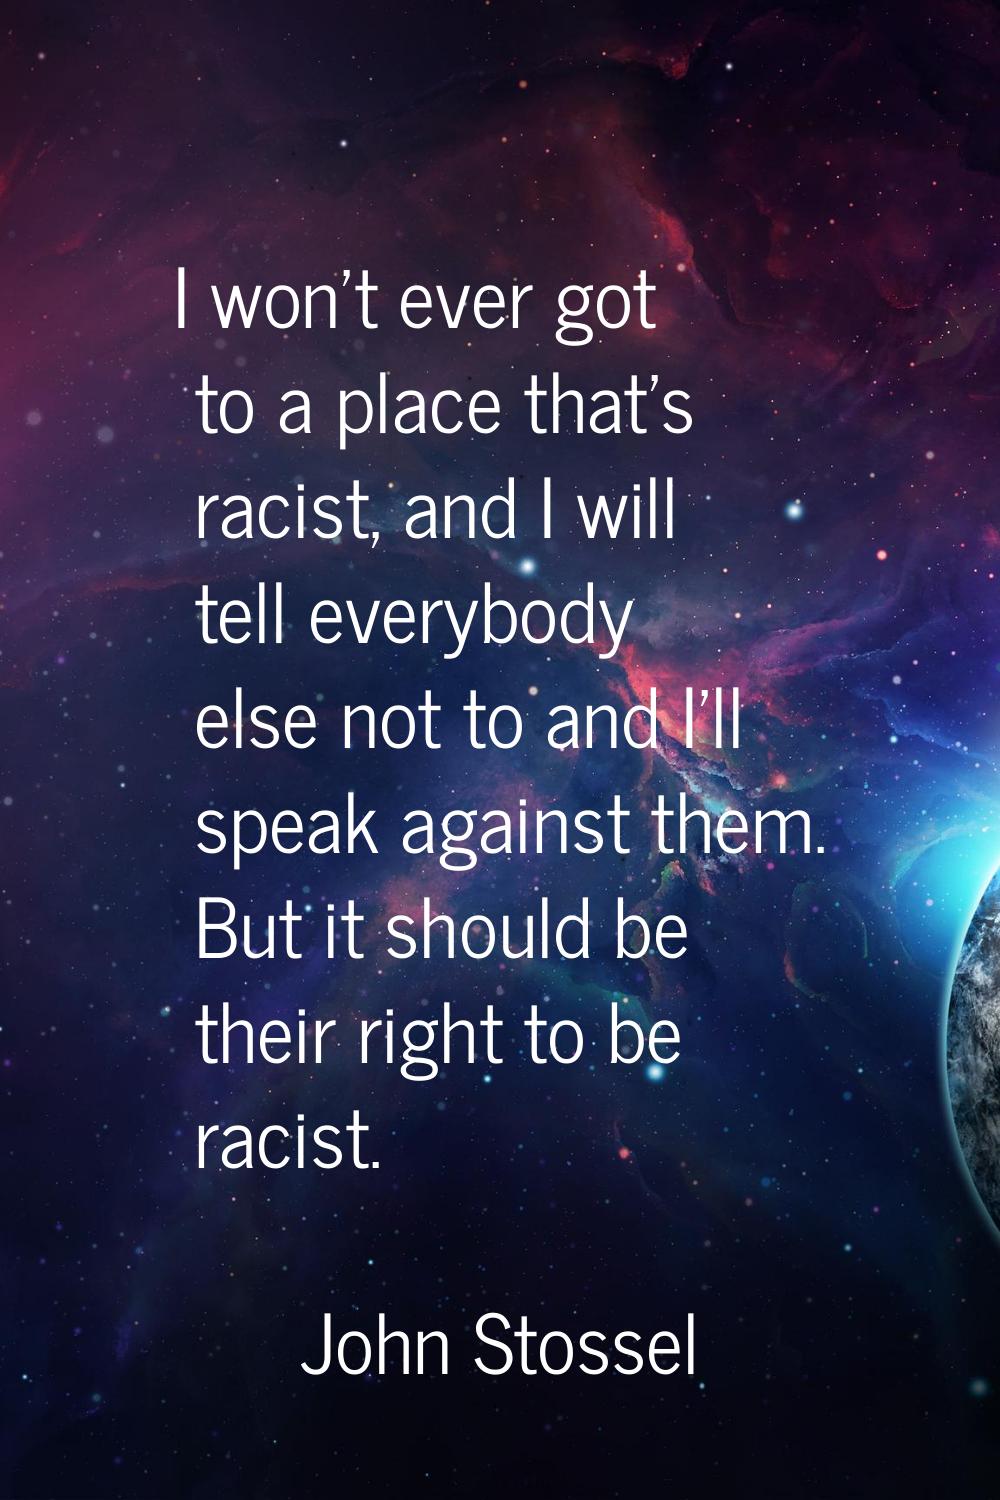 I won't ever got to a place that's racist, and I will tell everybody else not to and I'll speak aga